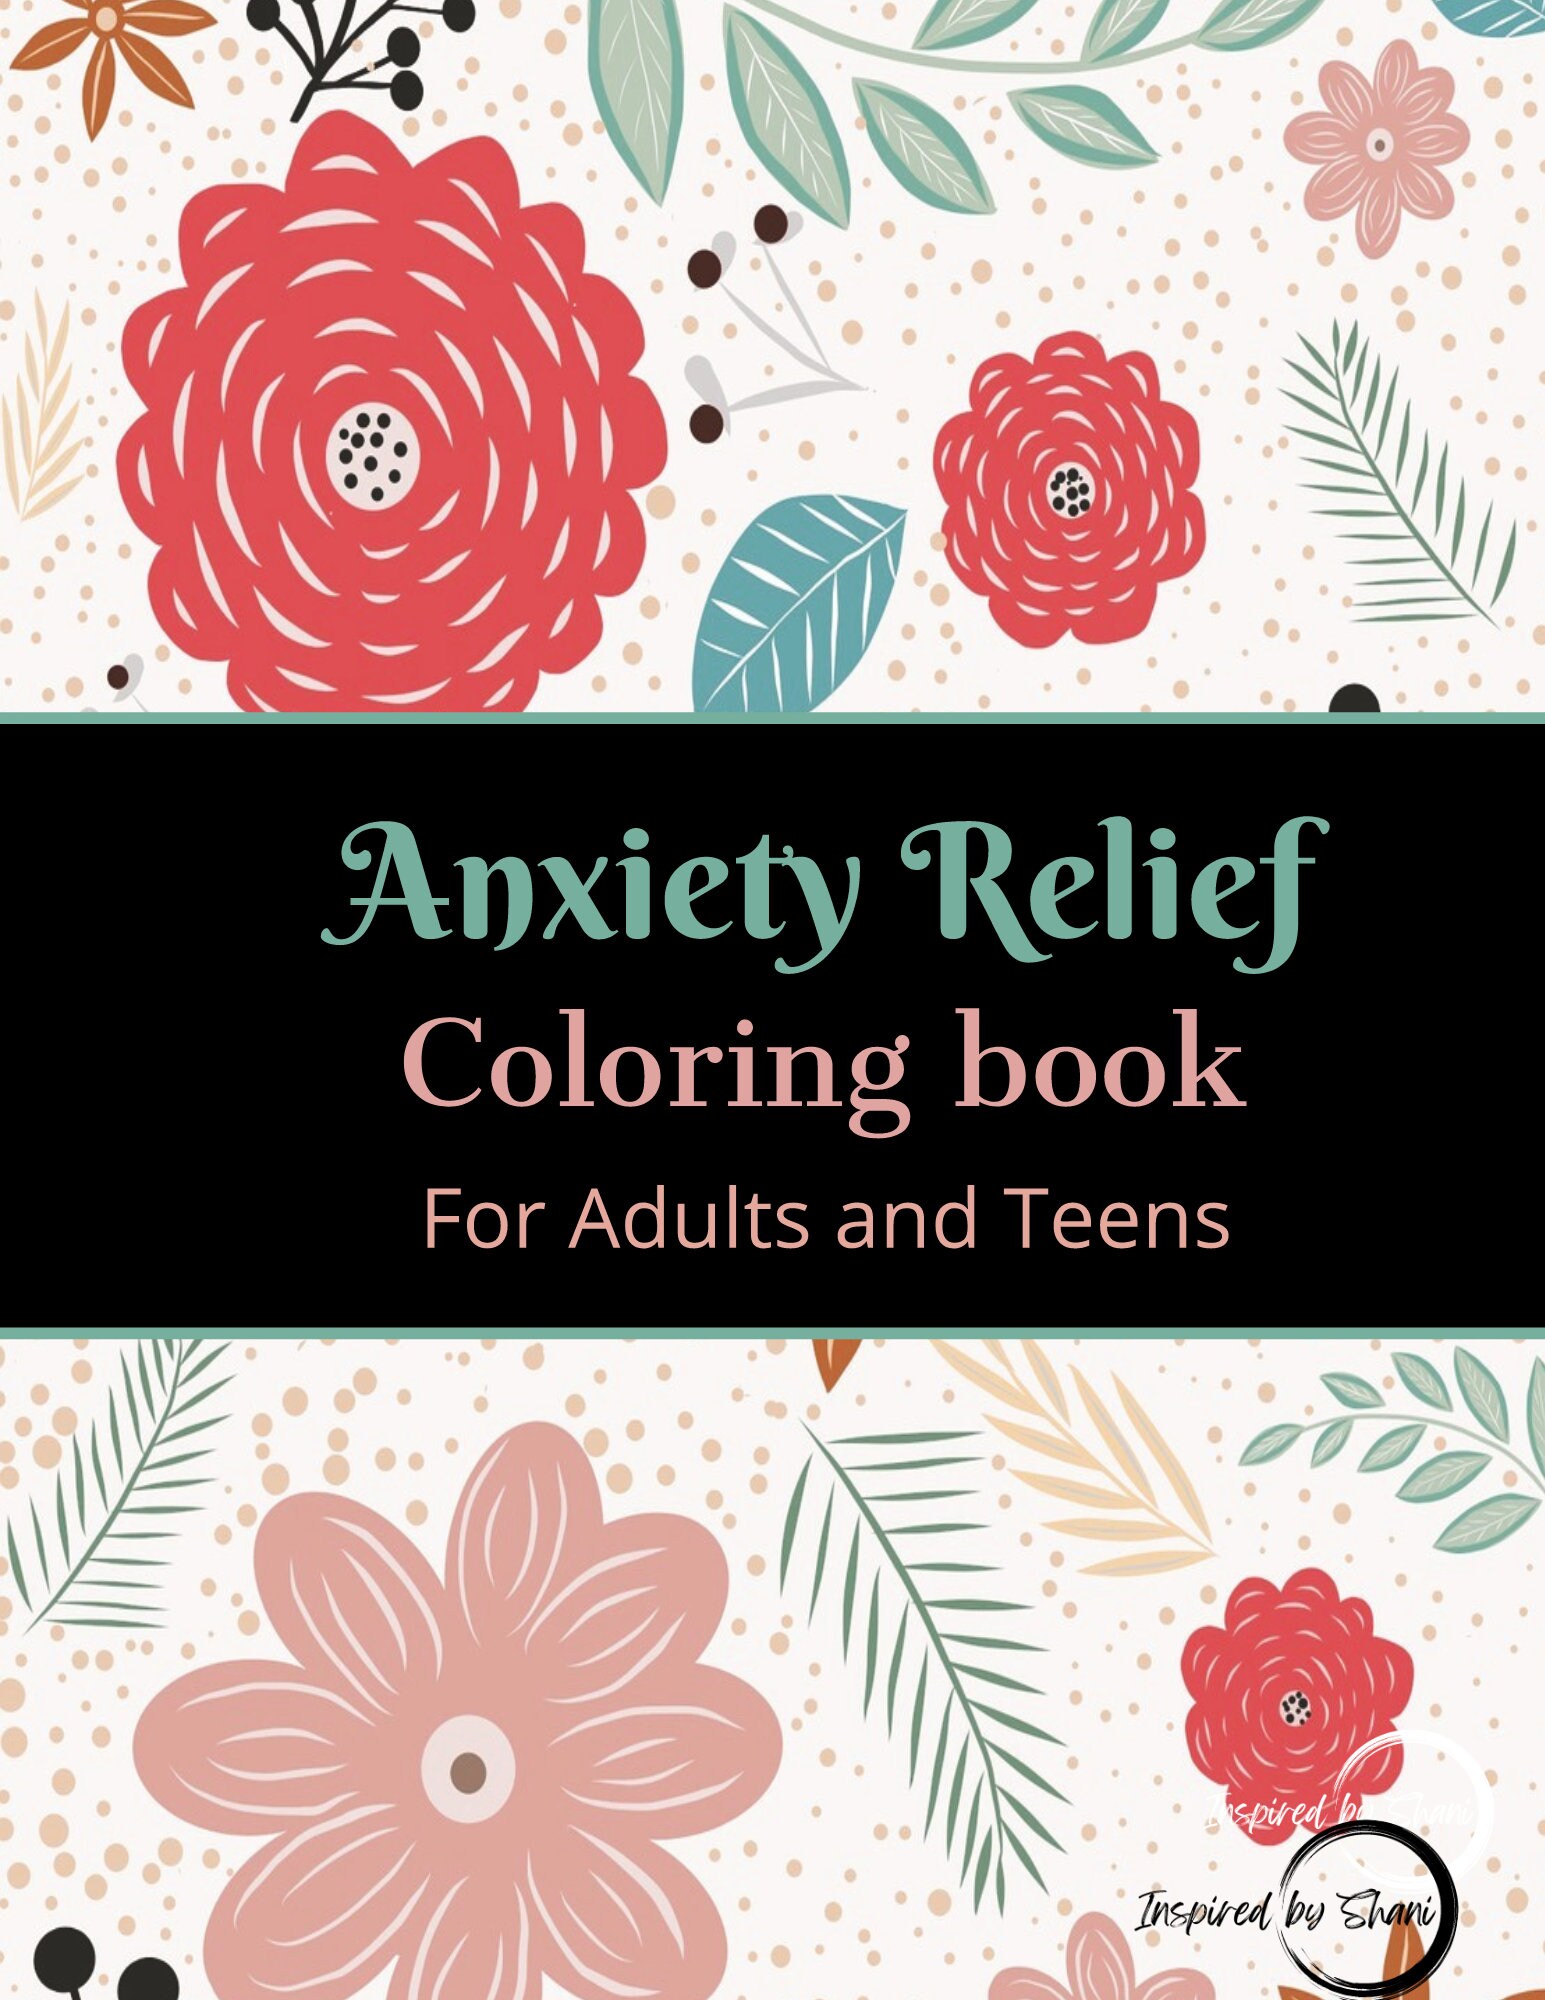 Flowers Patterns Adult coloring books for anxiety and depression for women  | Perfect Gift for Relaxation and Stress Relief | Coloring Books for Women